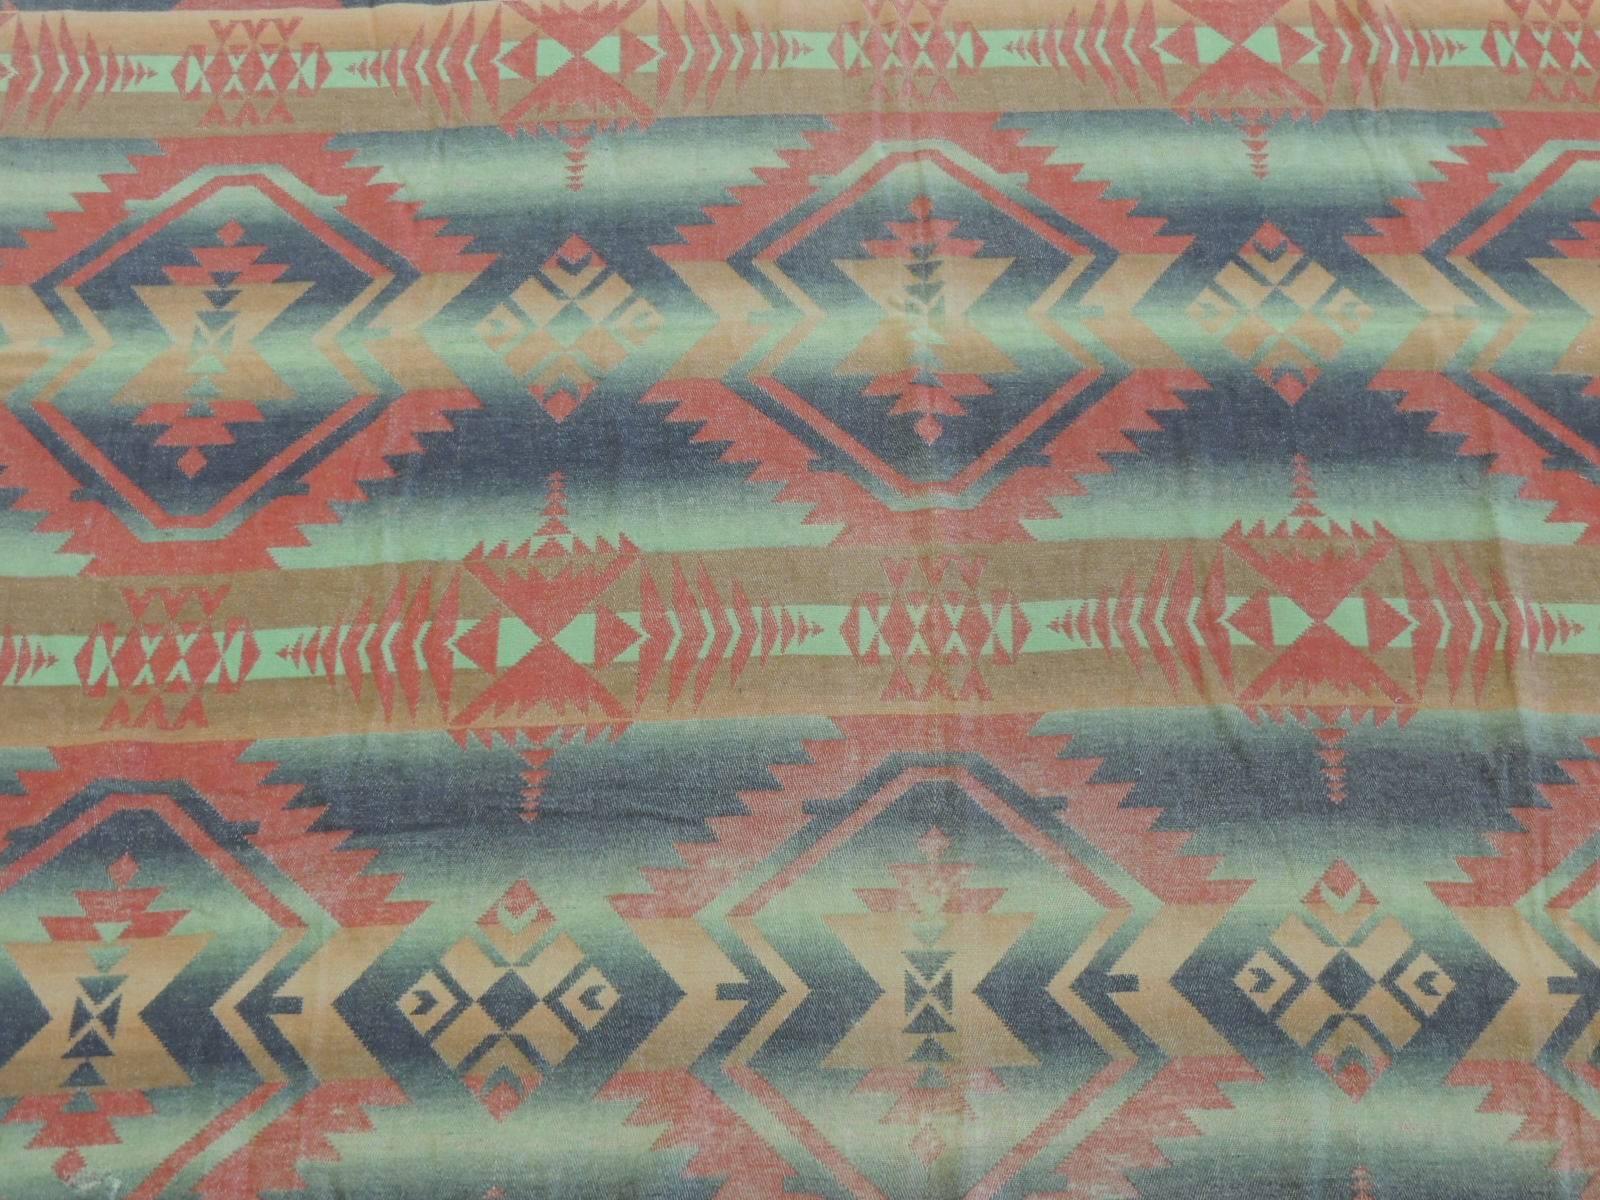 Vintage orange and green Southwestern design blanket with an eye-dazzler pattern.
Satin ribbon finish edges (some small repairs to ribbon.)

